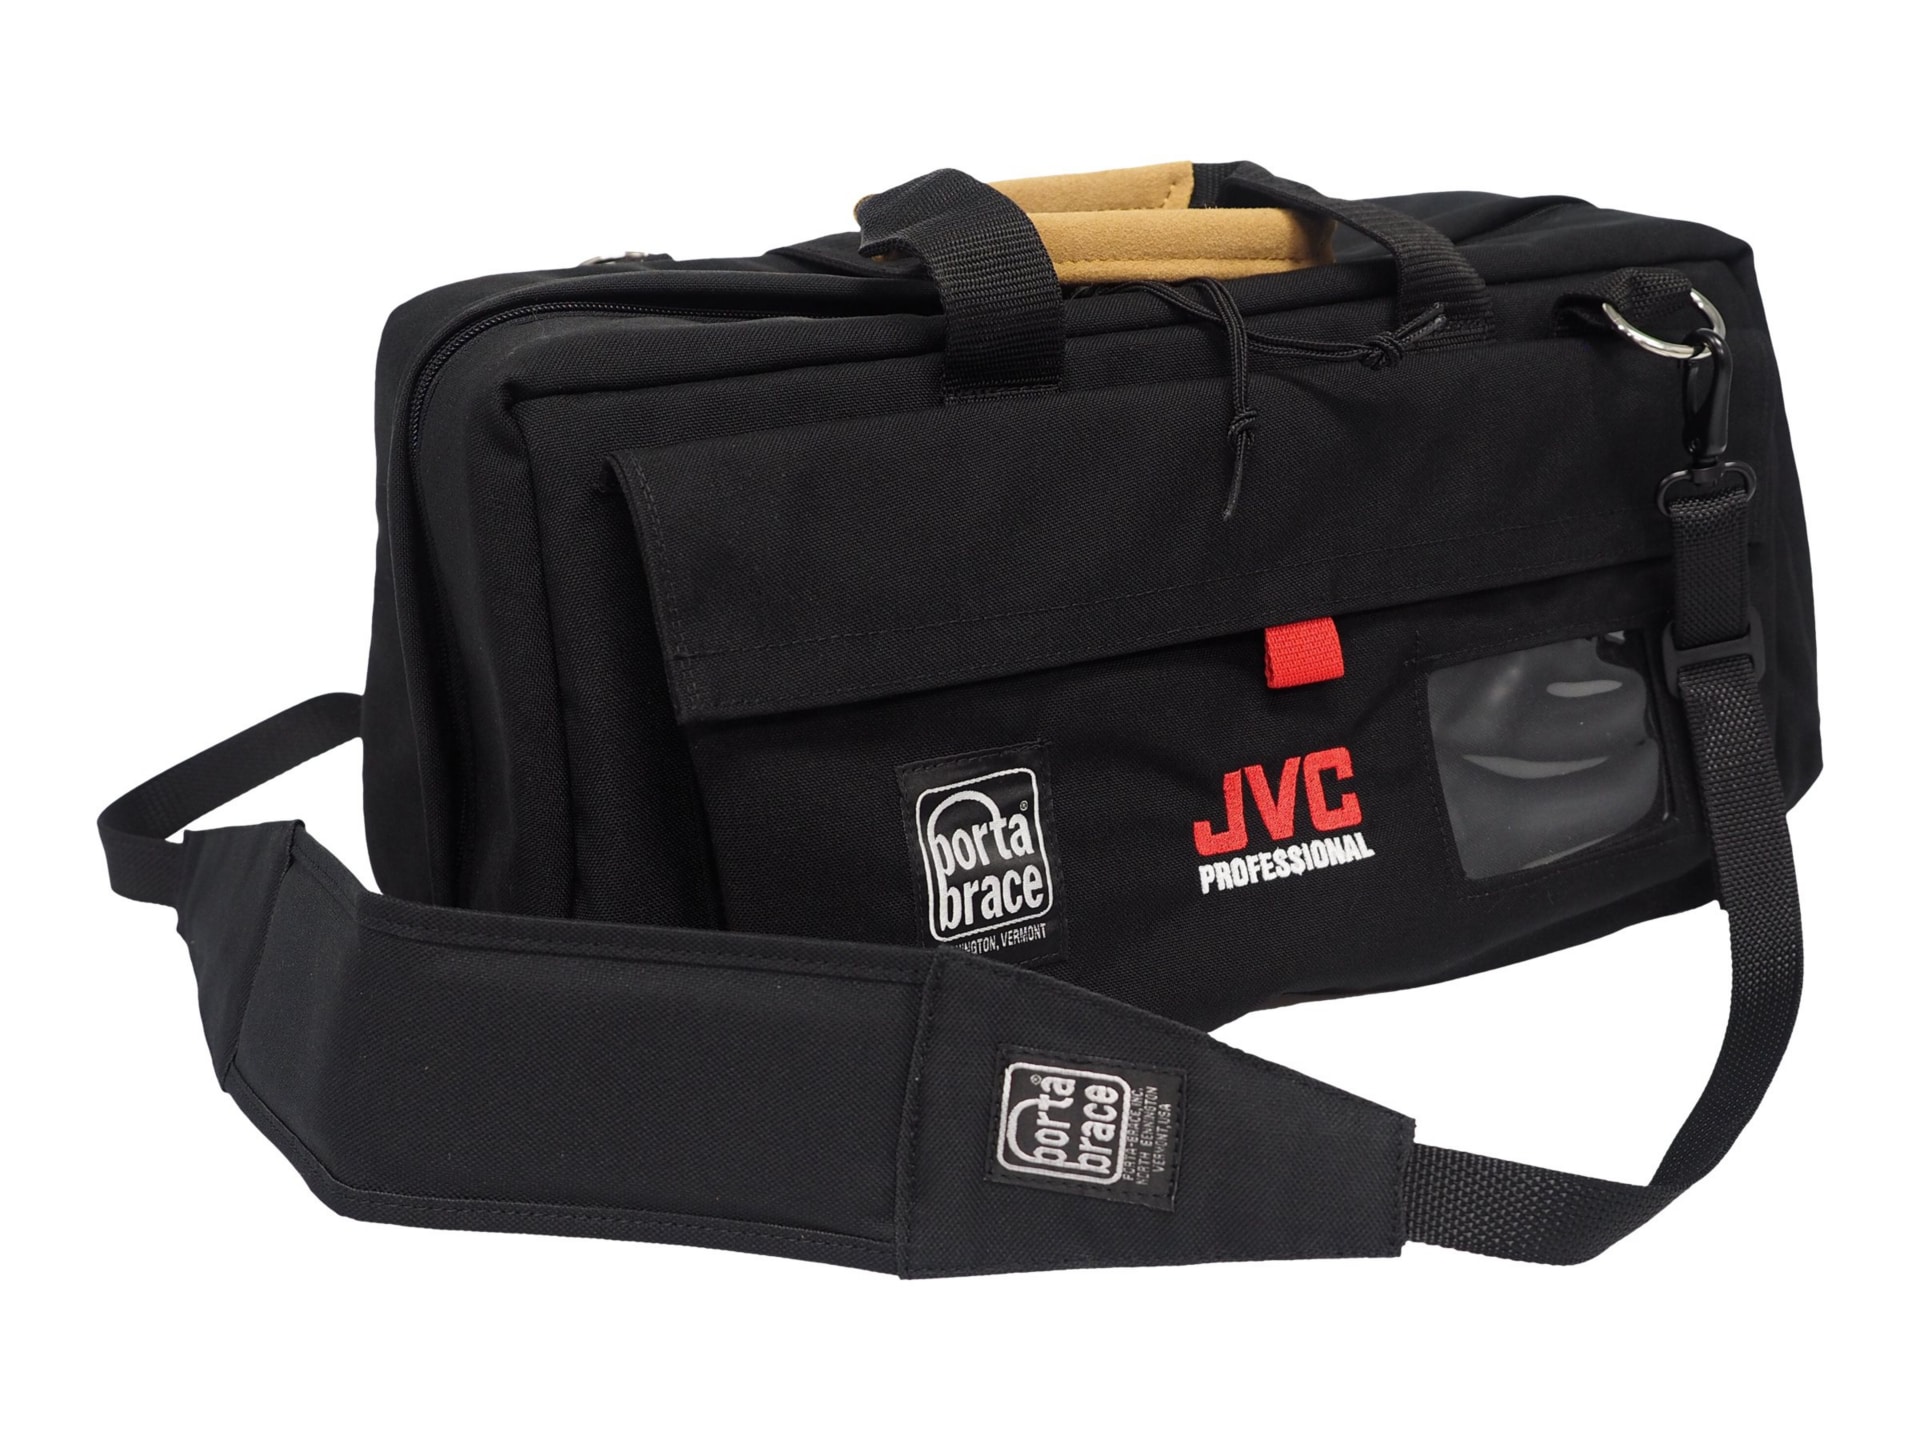 JVC CTC200B - carrying bag for camcorder